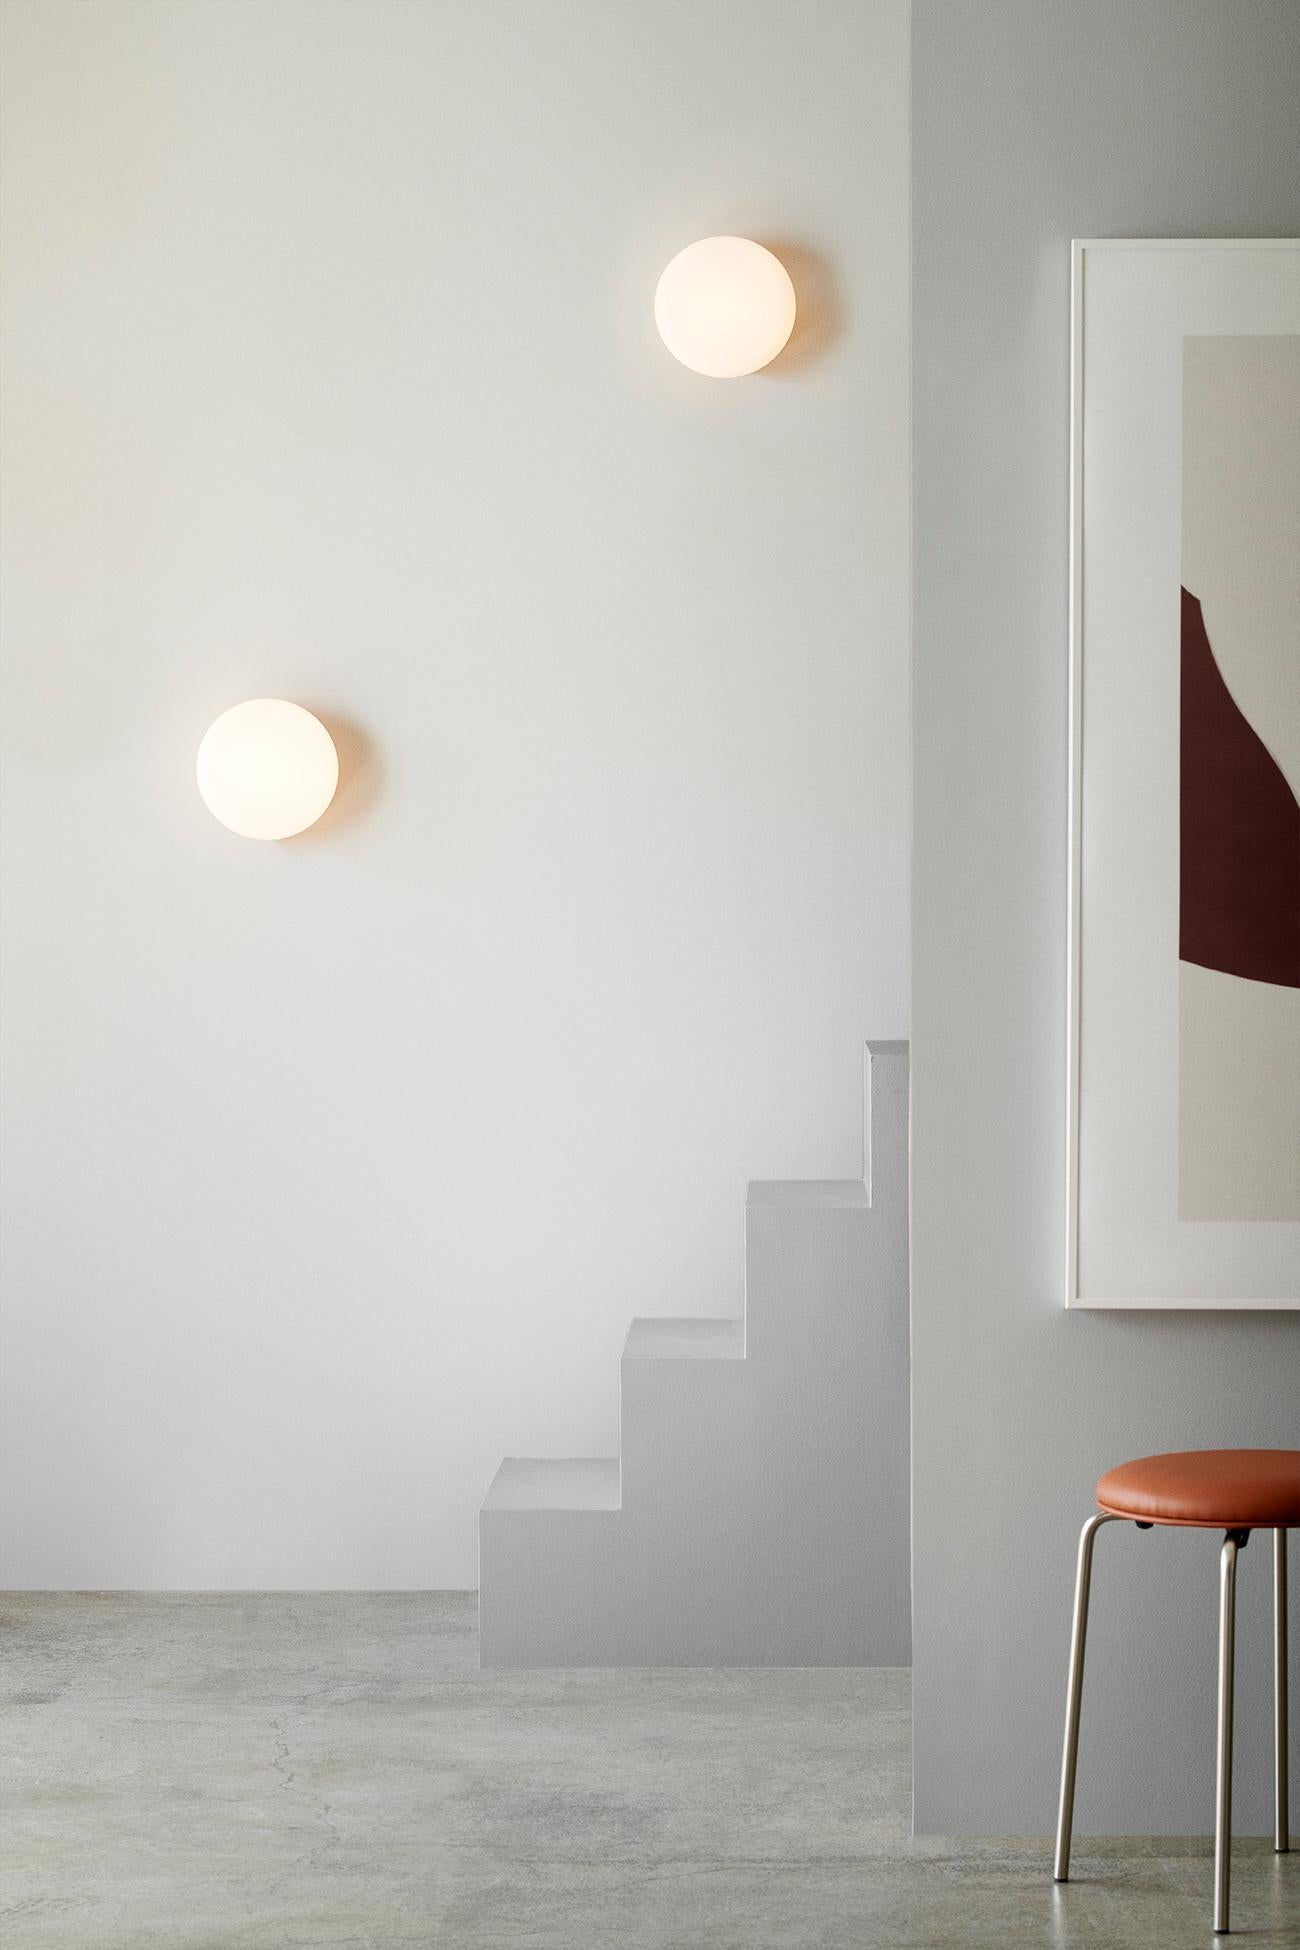 Opa wall lamp is a small opal lamp suitable for both wall and ceiling. The aim was to create a clean and effectful glass lamp which could work in small spaces ex. hallways, entrance spaces or beside pictures or mirrors and is suitable for office